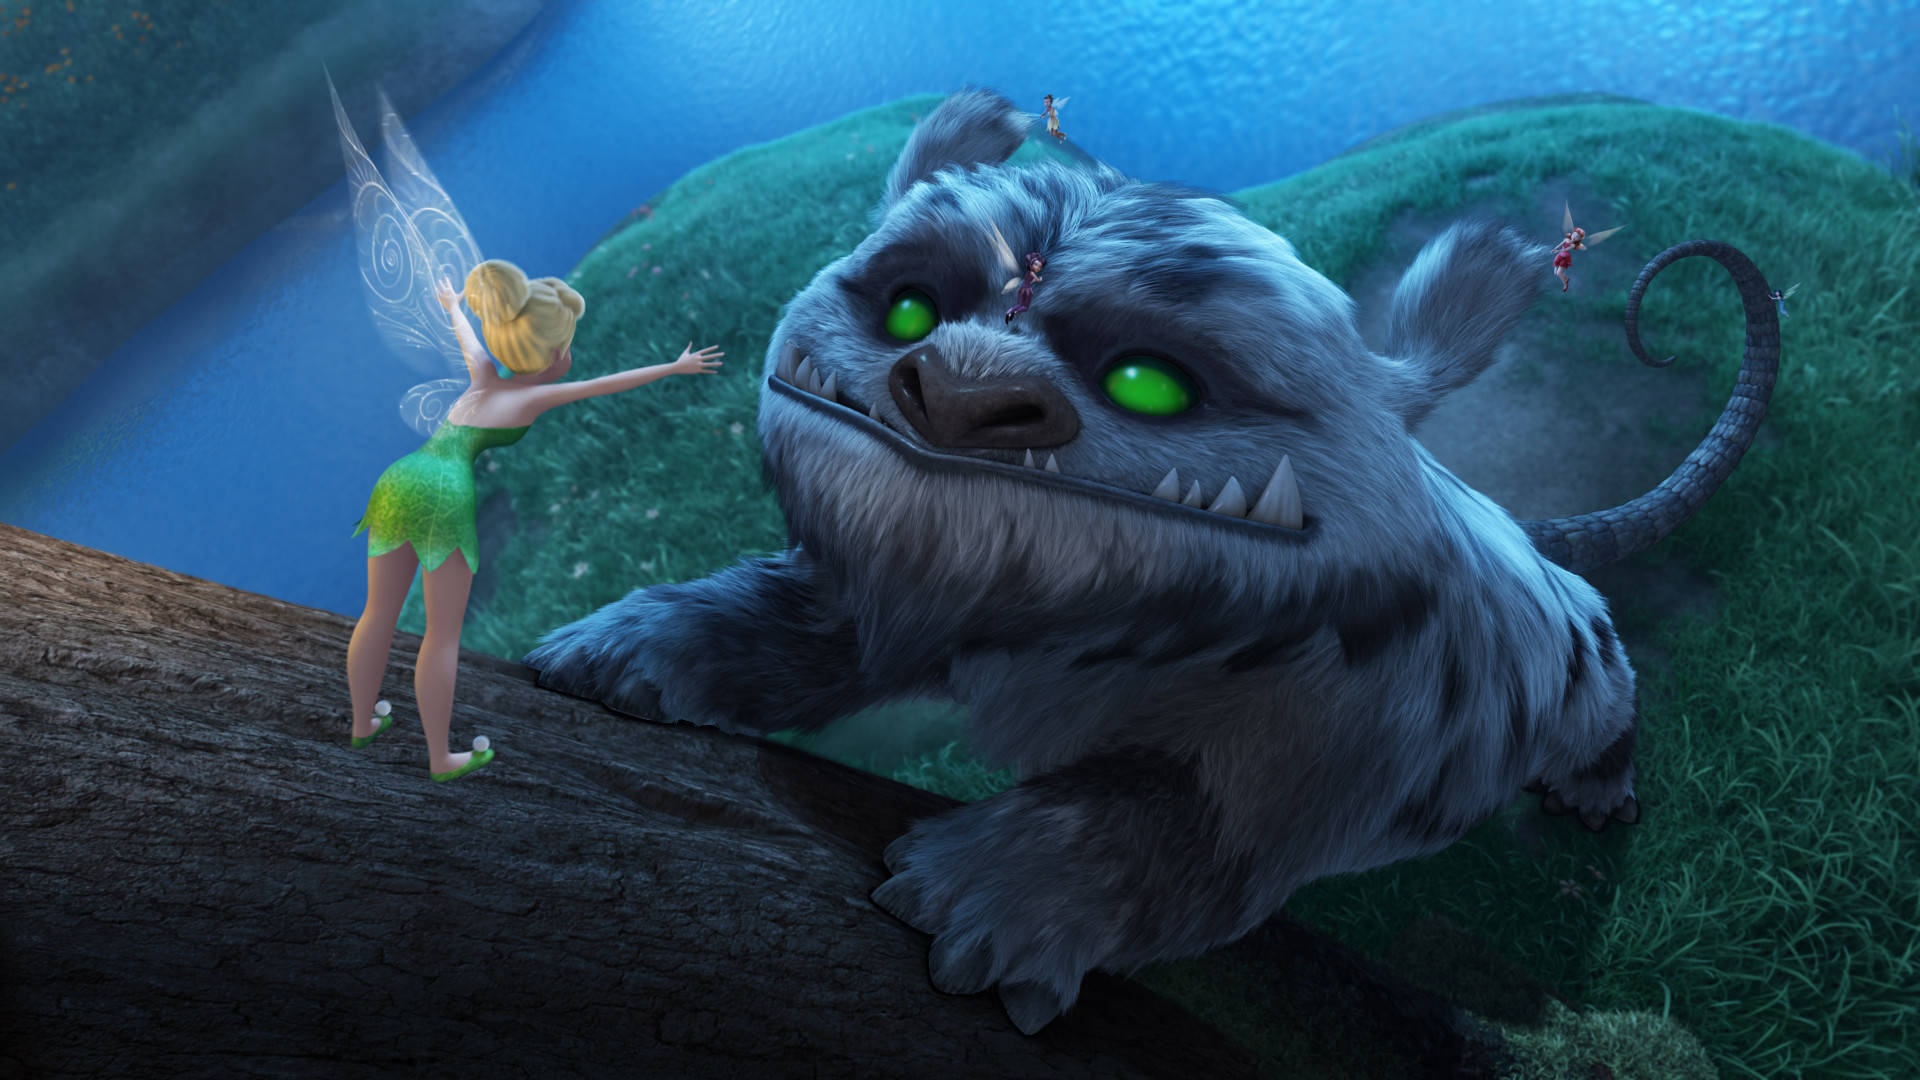 Tinker Bell With A Giant Creature